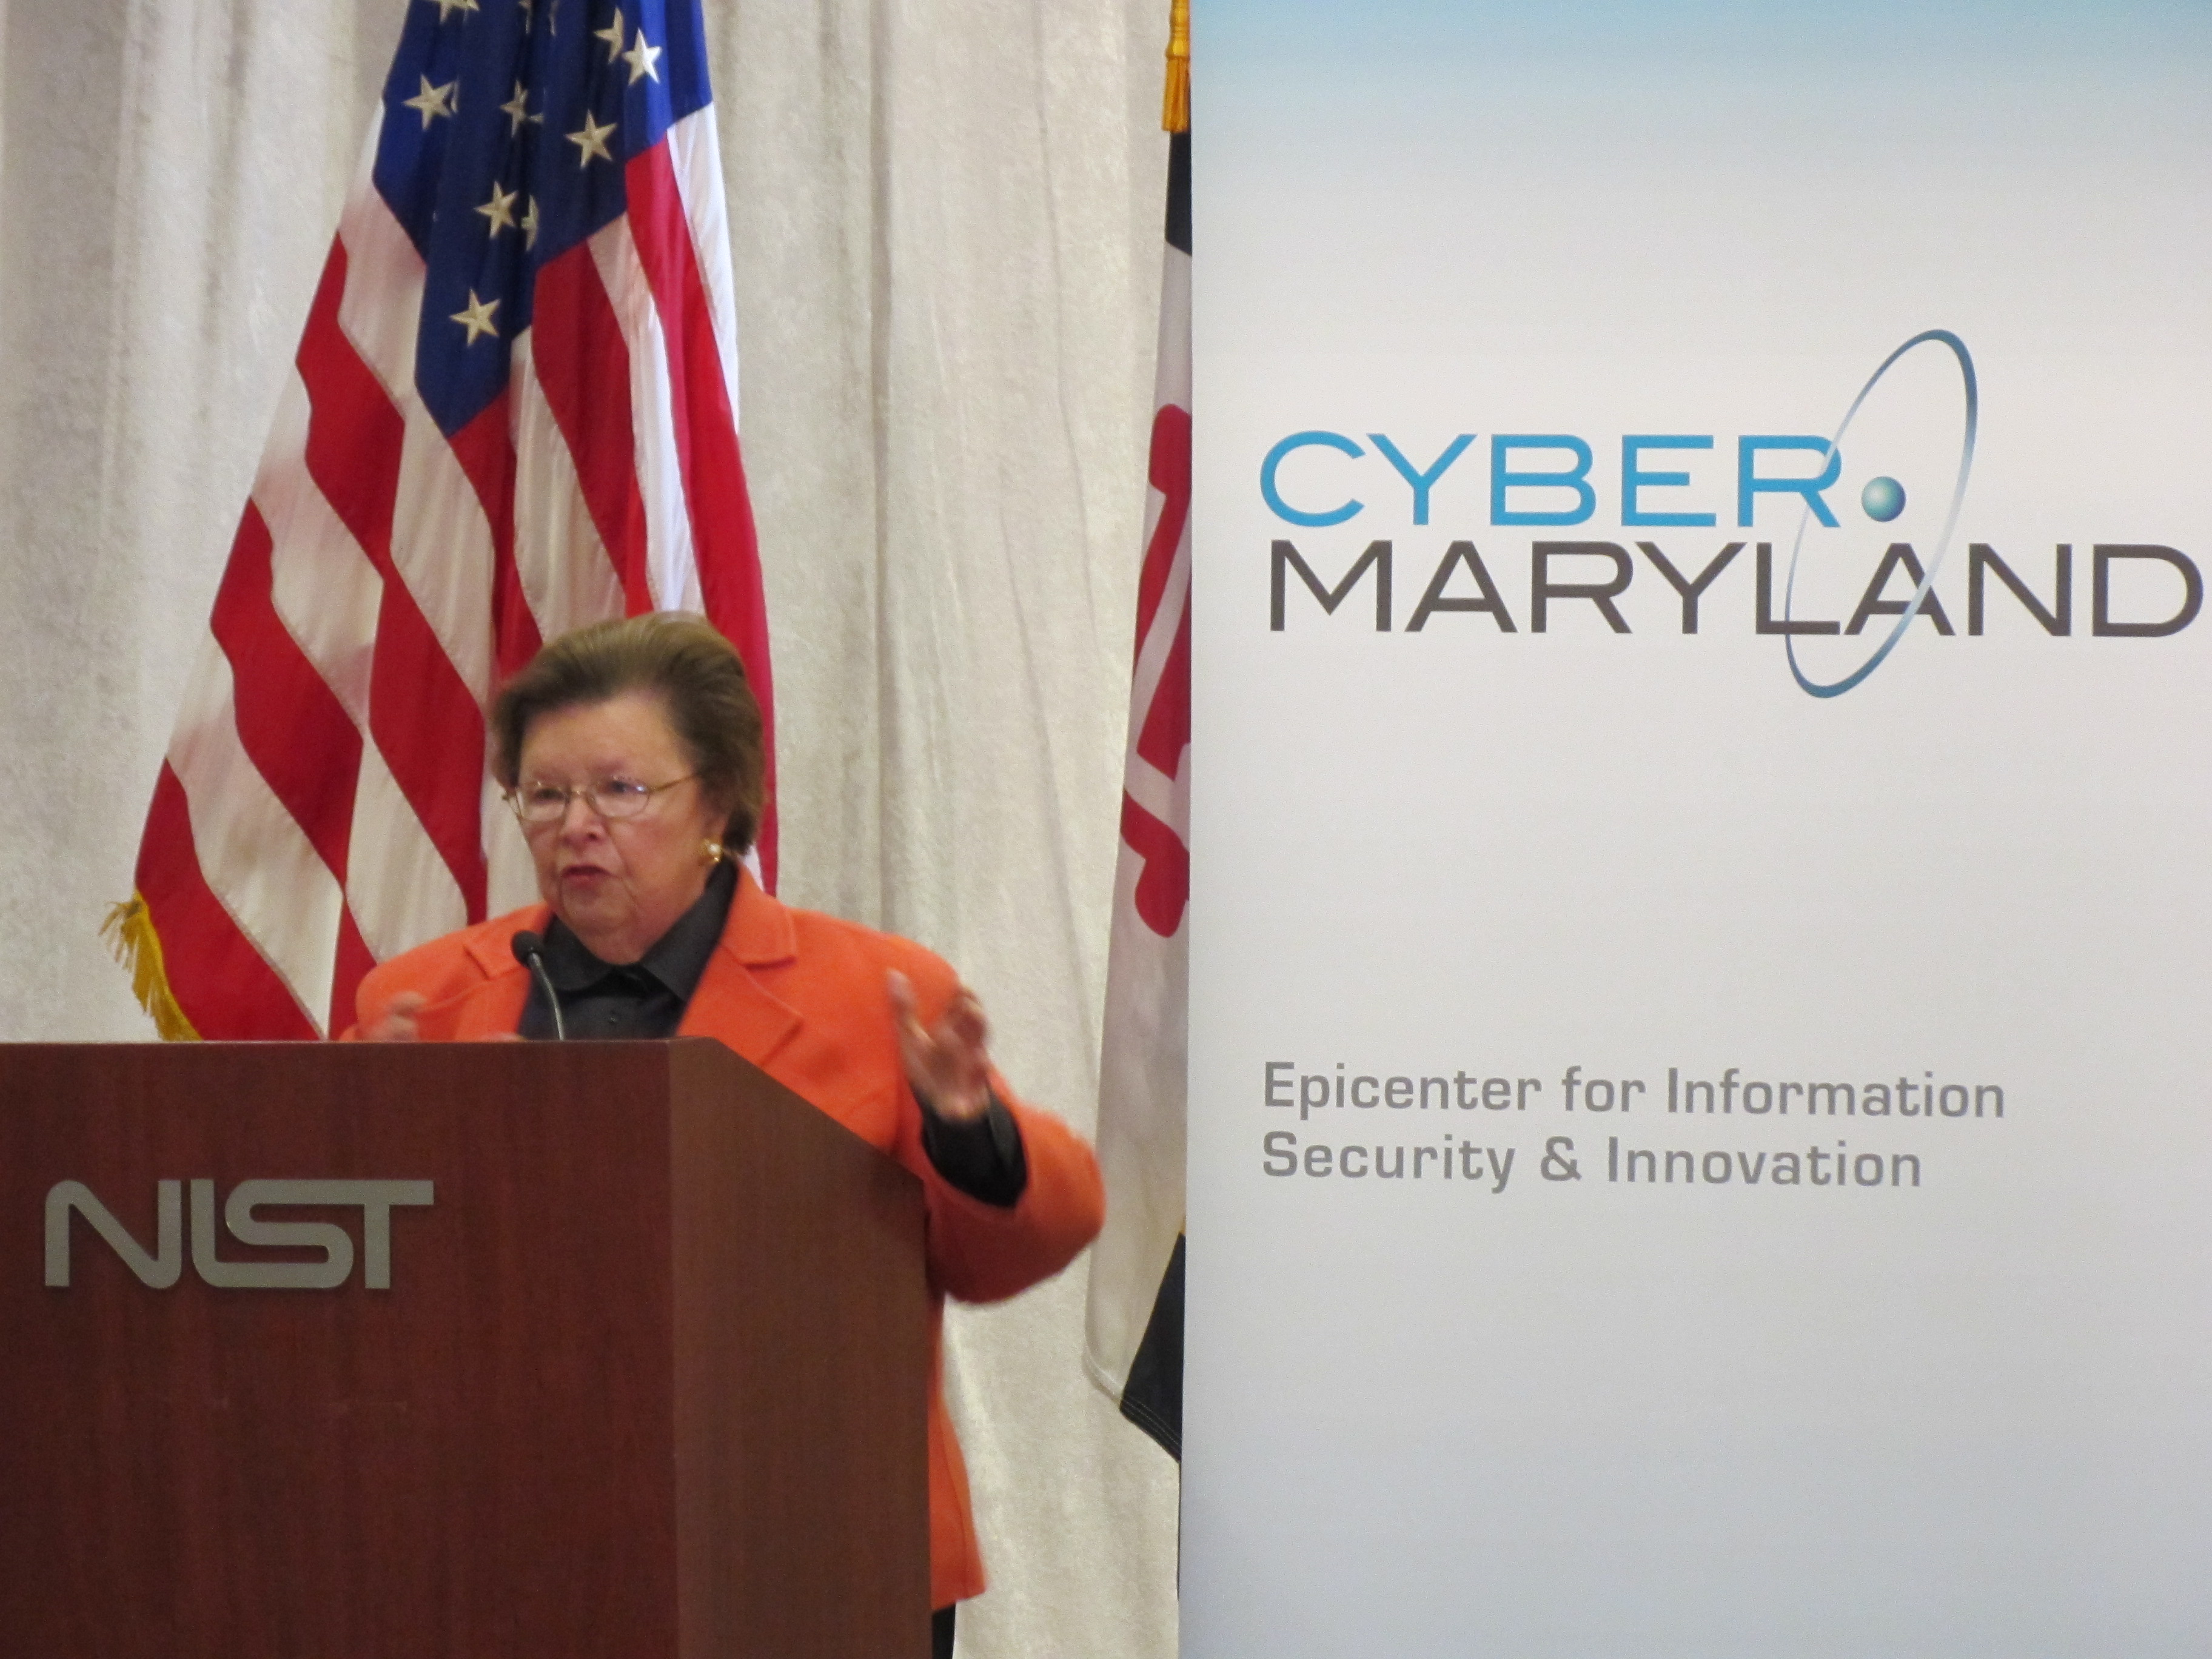 Mikulski Announces National Cybersecurity Center of Excellence at NIST